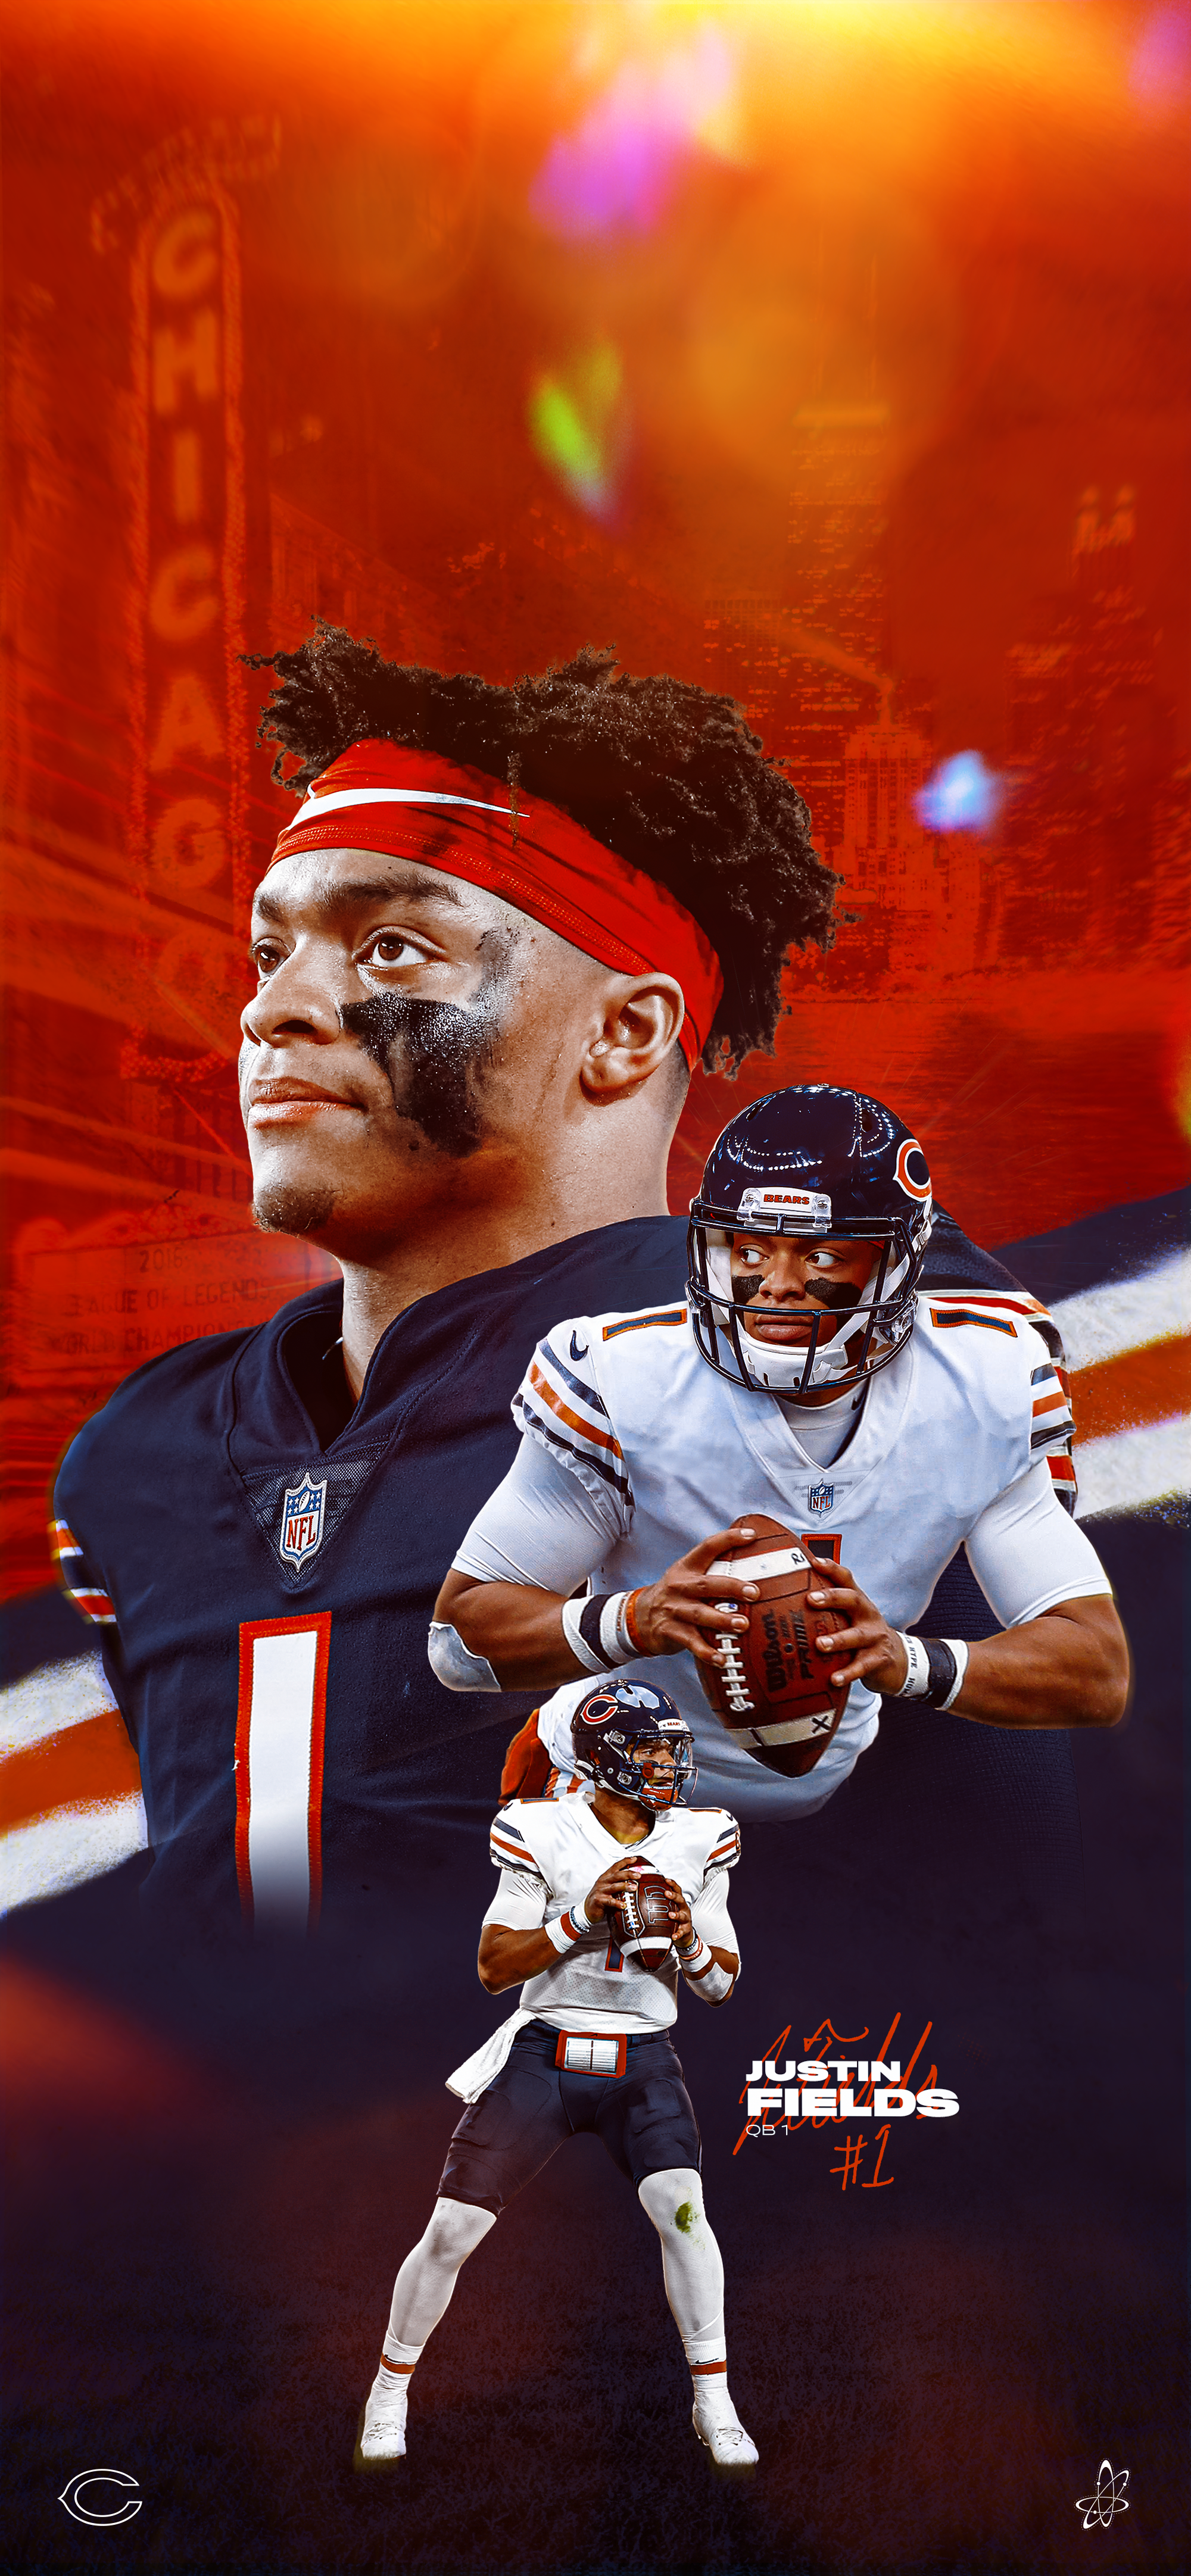 Justin Fields Chicago Bears Phone Wallpaper (As Requested): CHIBears